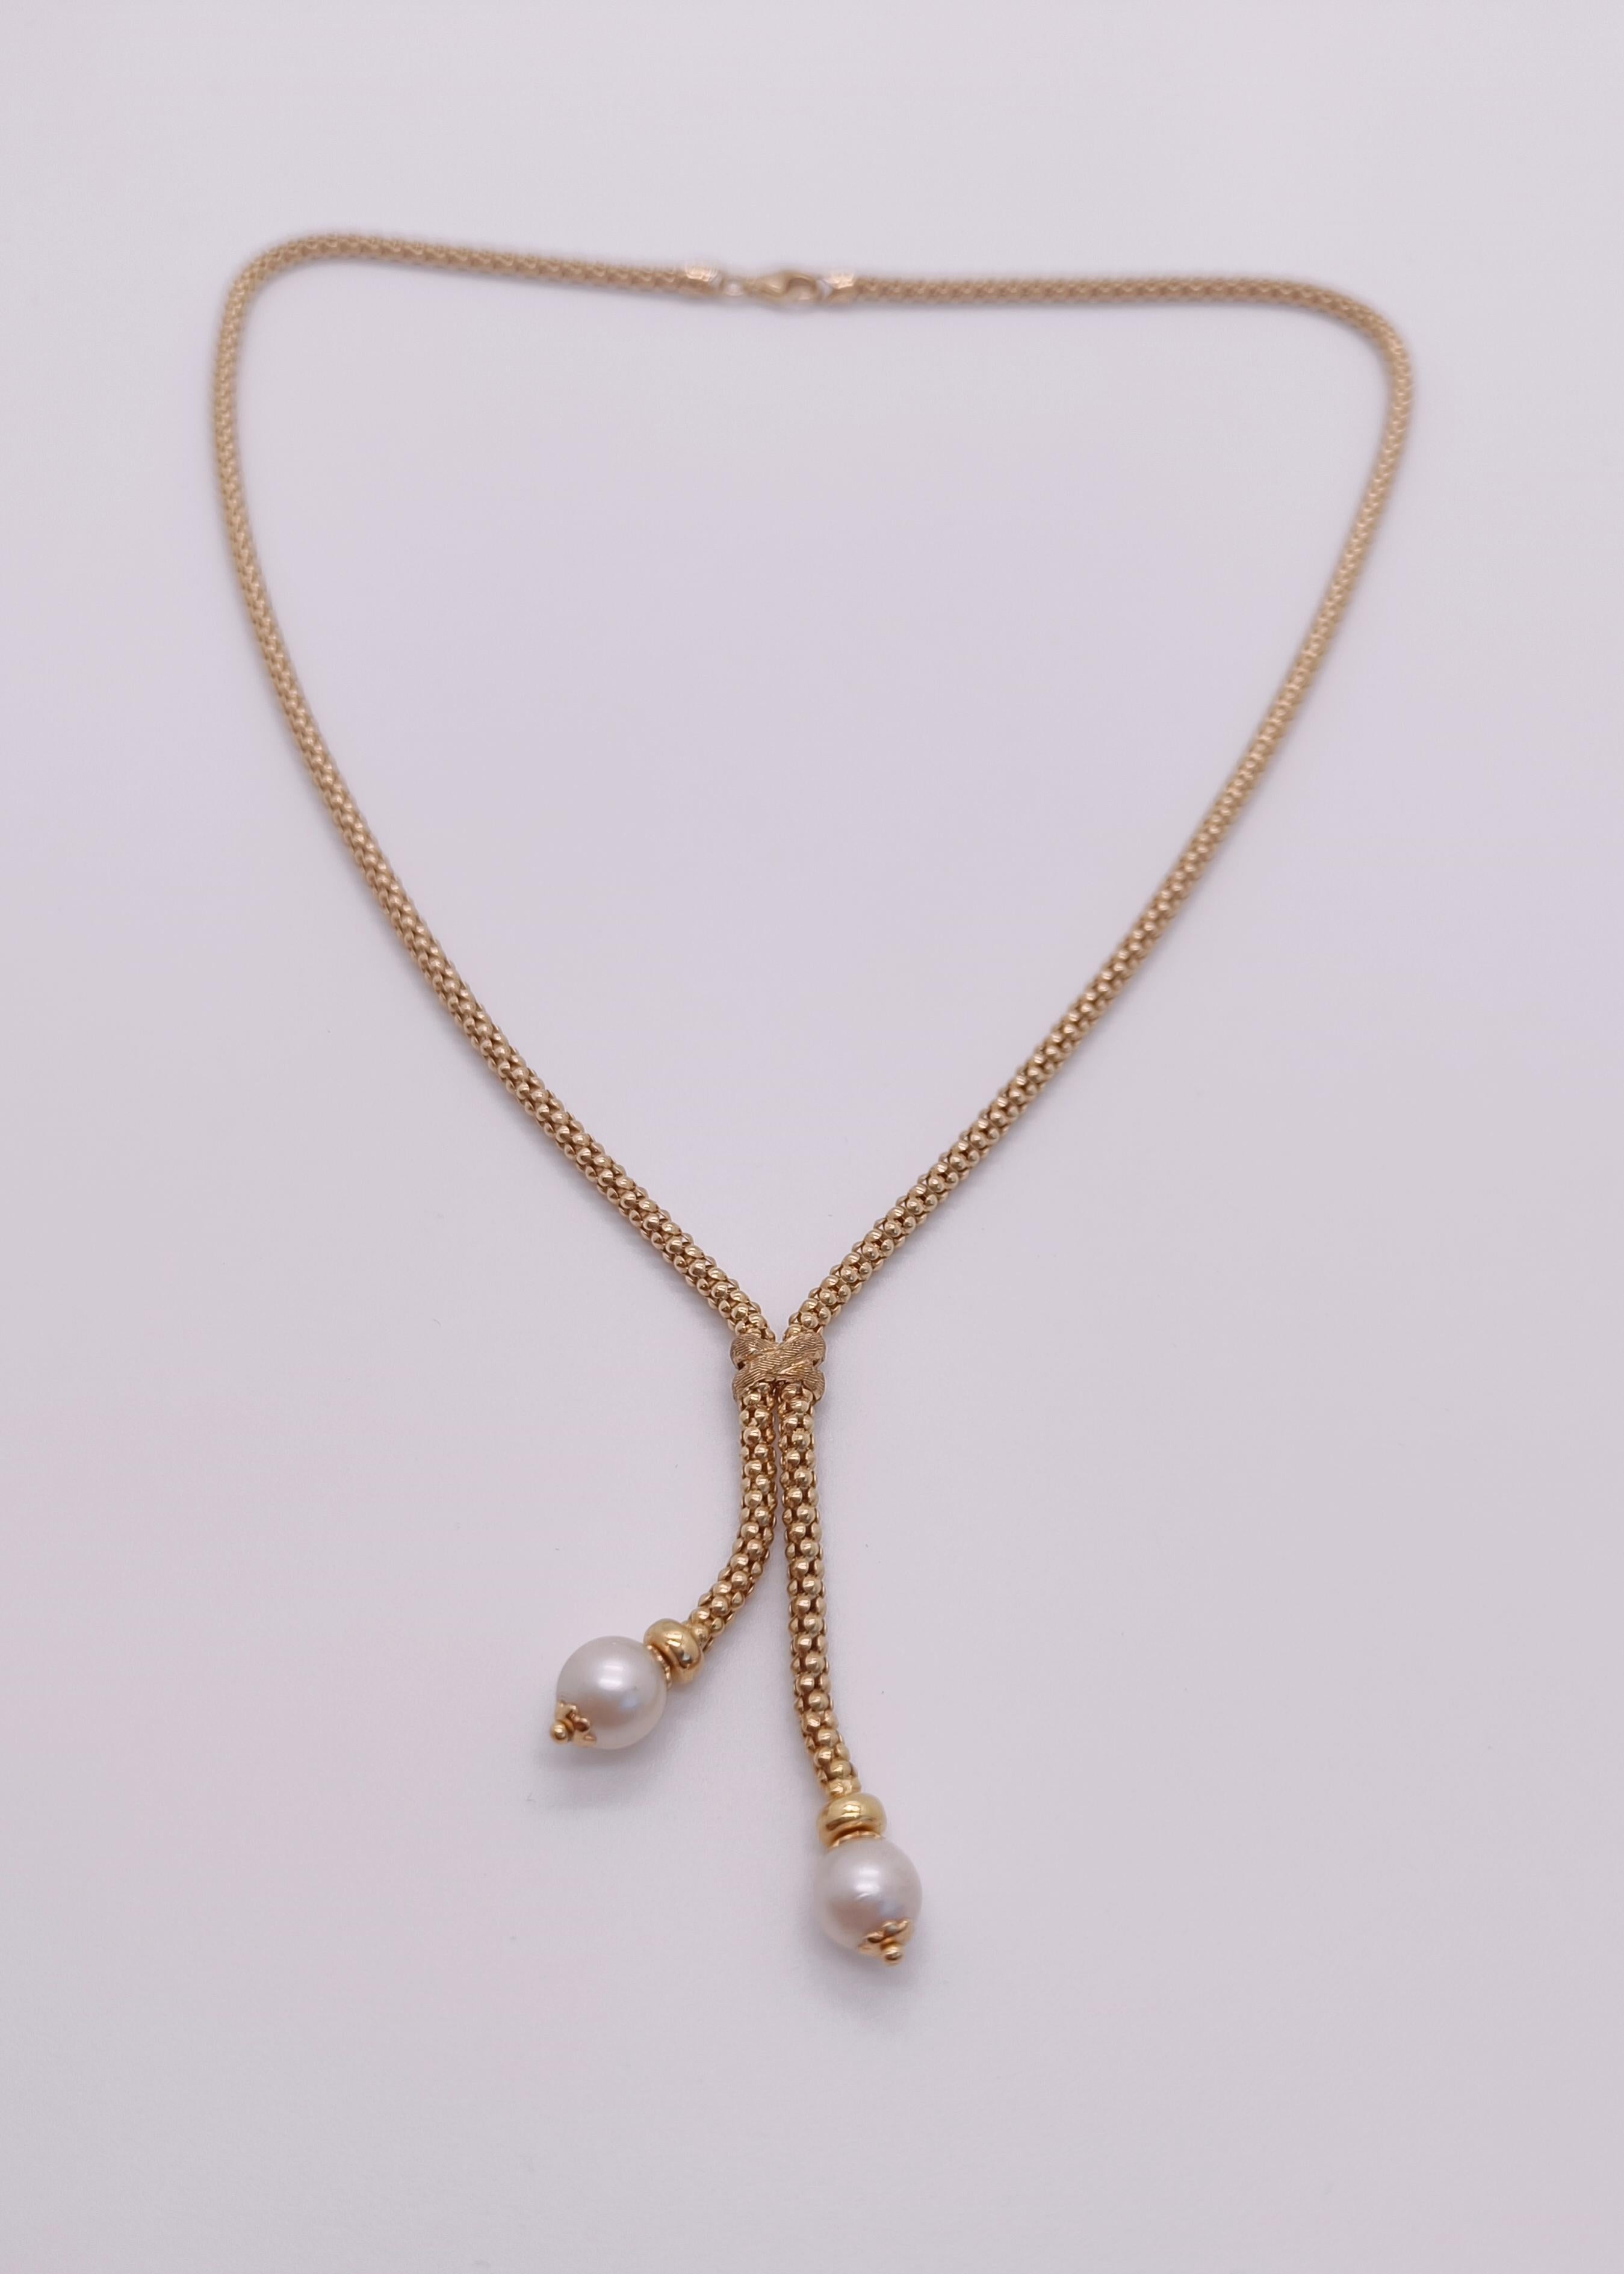 Necklace with Dangling Pearls in 18k Yellow Gold In New Condition For Sale In Fara Filiorum Petri, IT